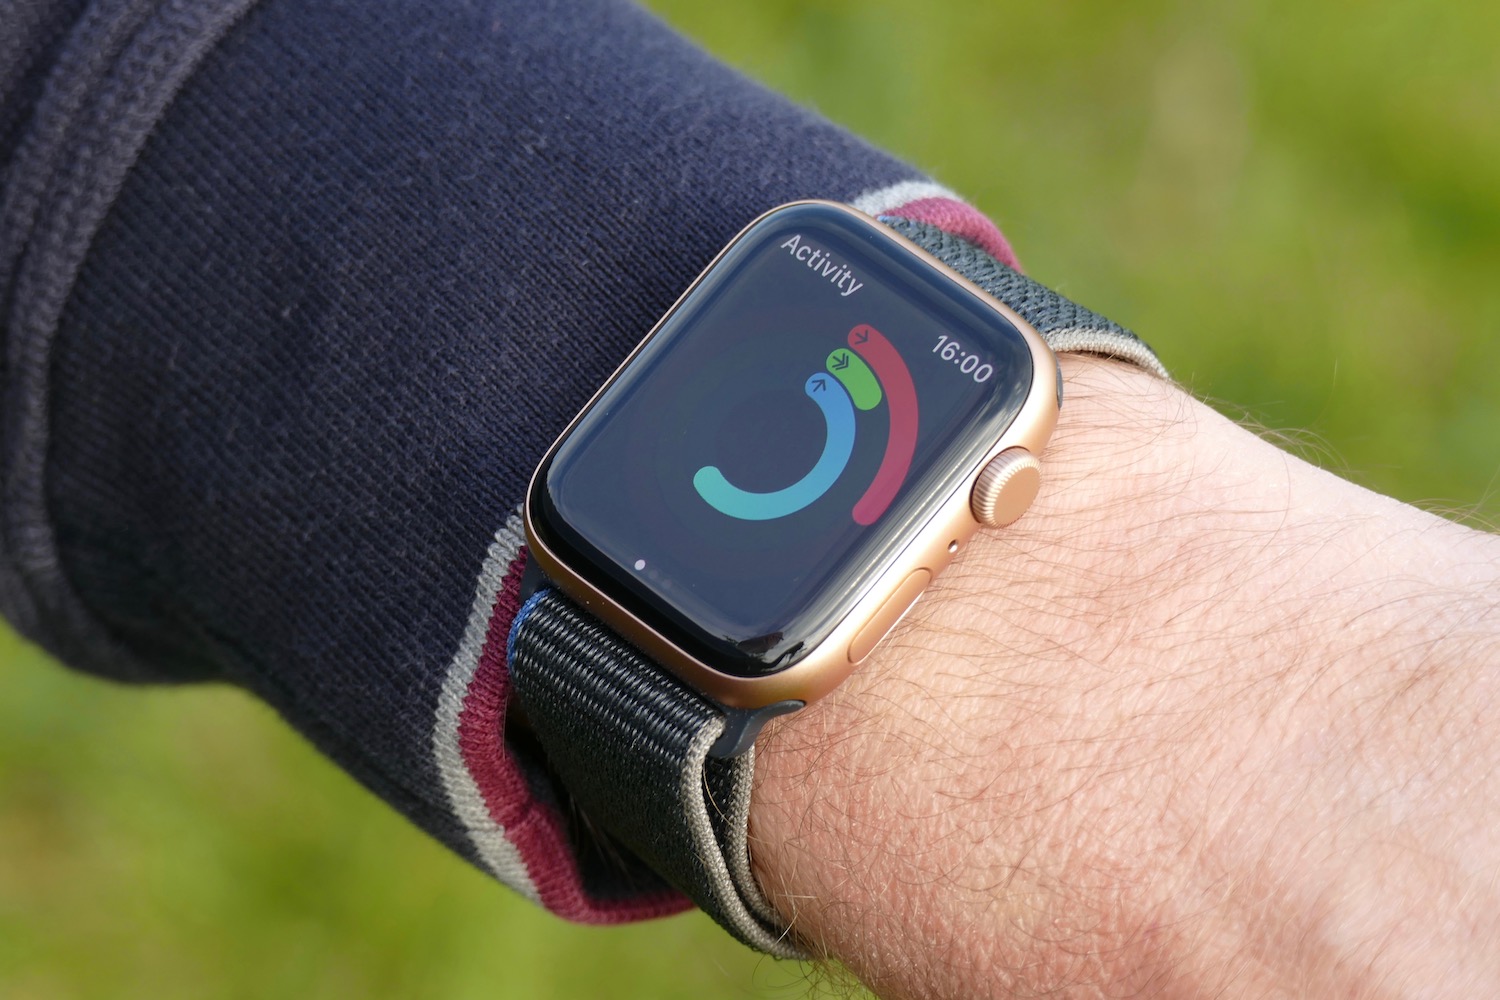 Activity rings on an Apple Watch.